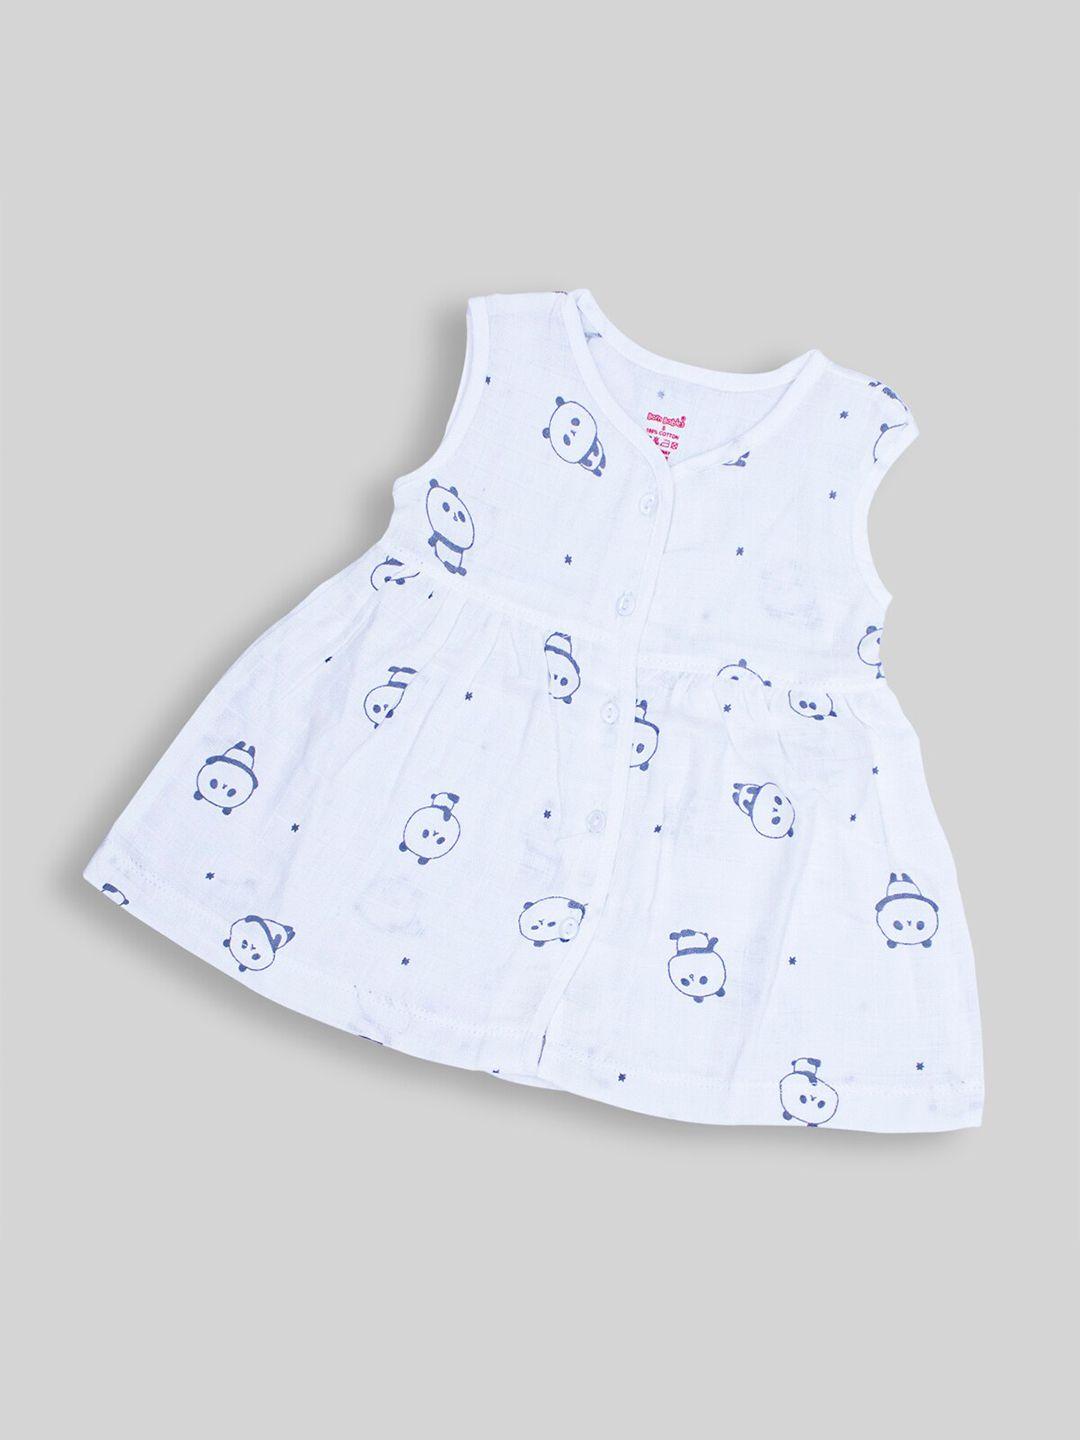 born-babies-girl-graphic-printed-cotton-fit-&-flare-dress